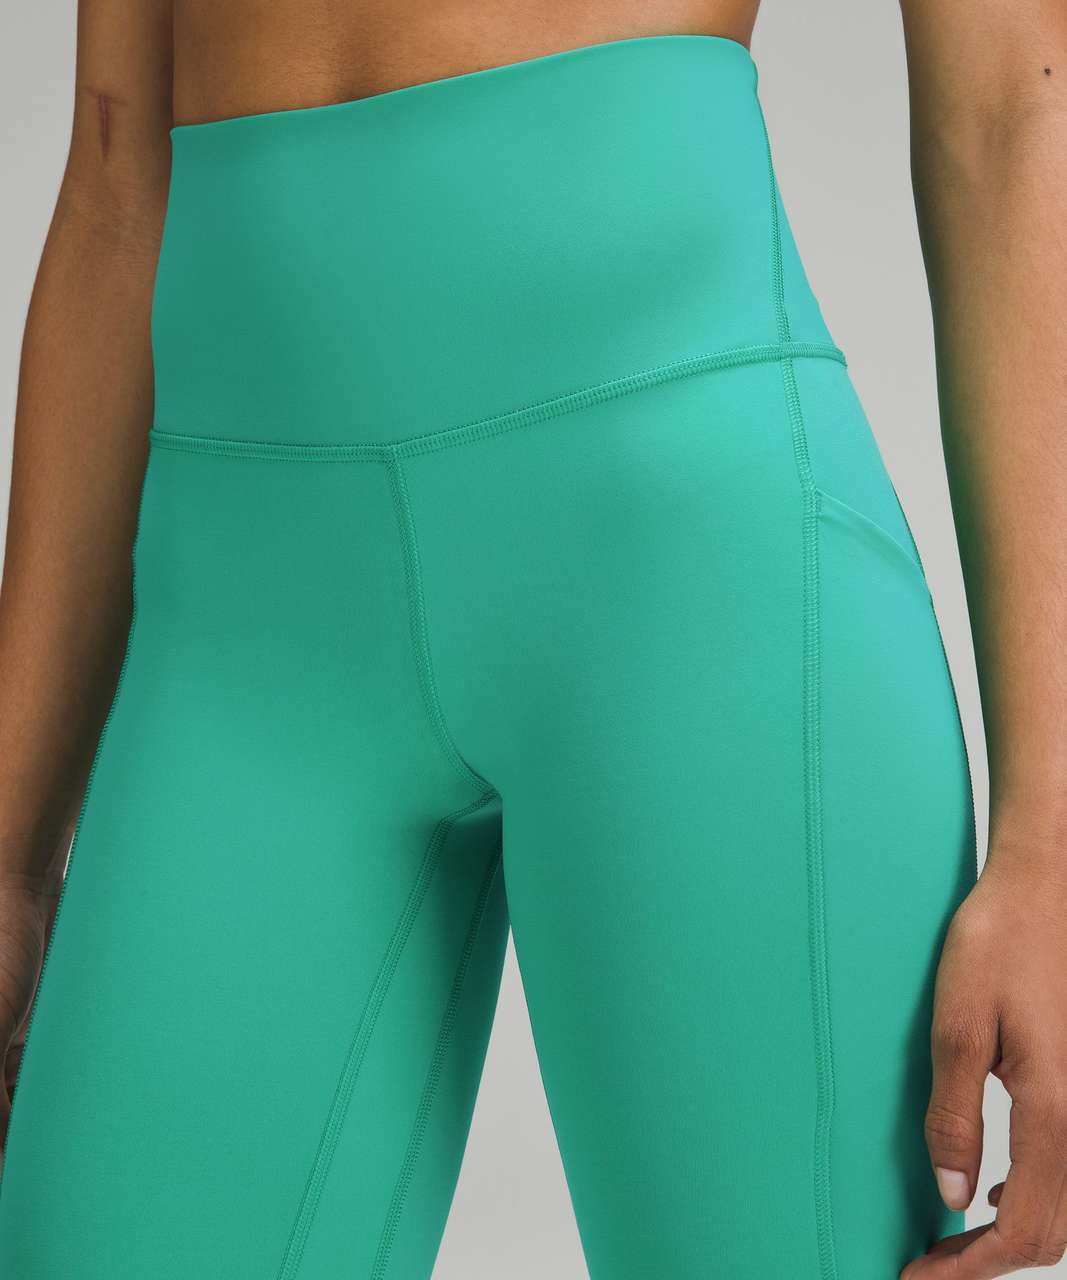 Lululemon Align High-Rise Pant with Pockets 25" - Kelly Green